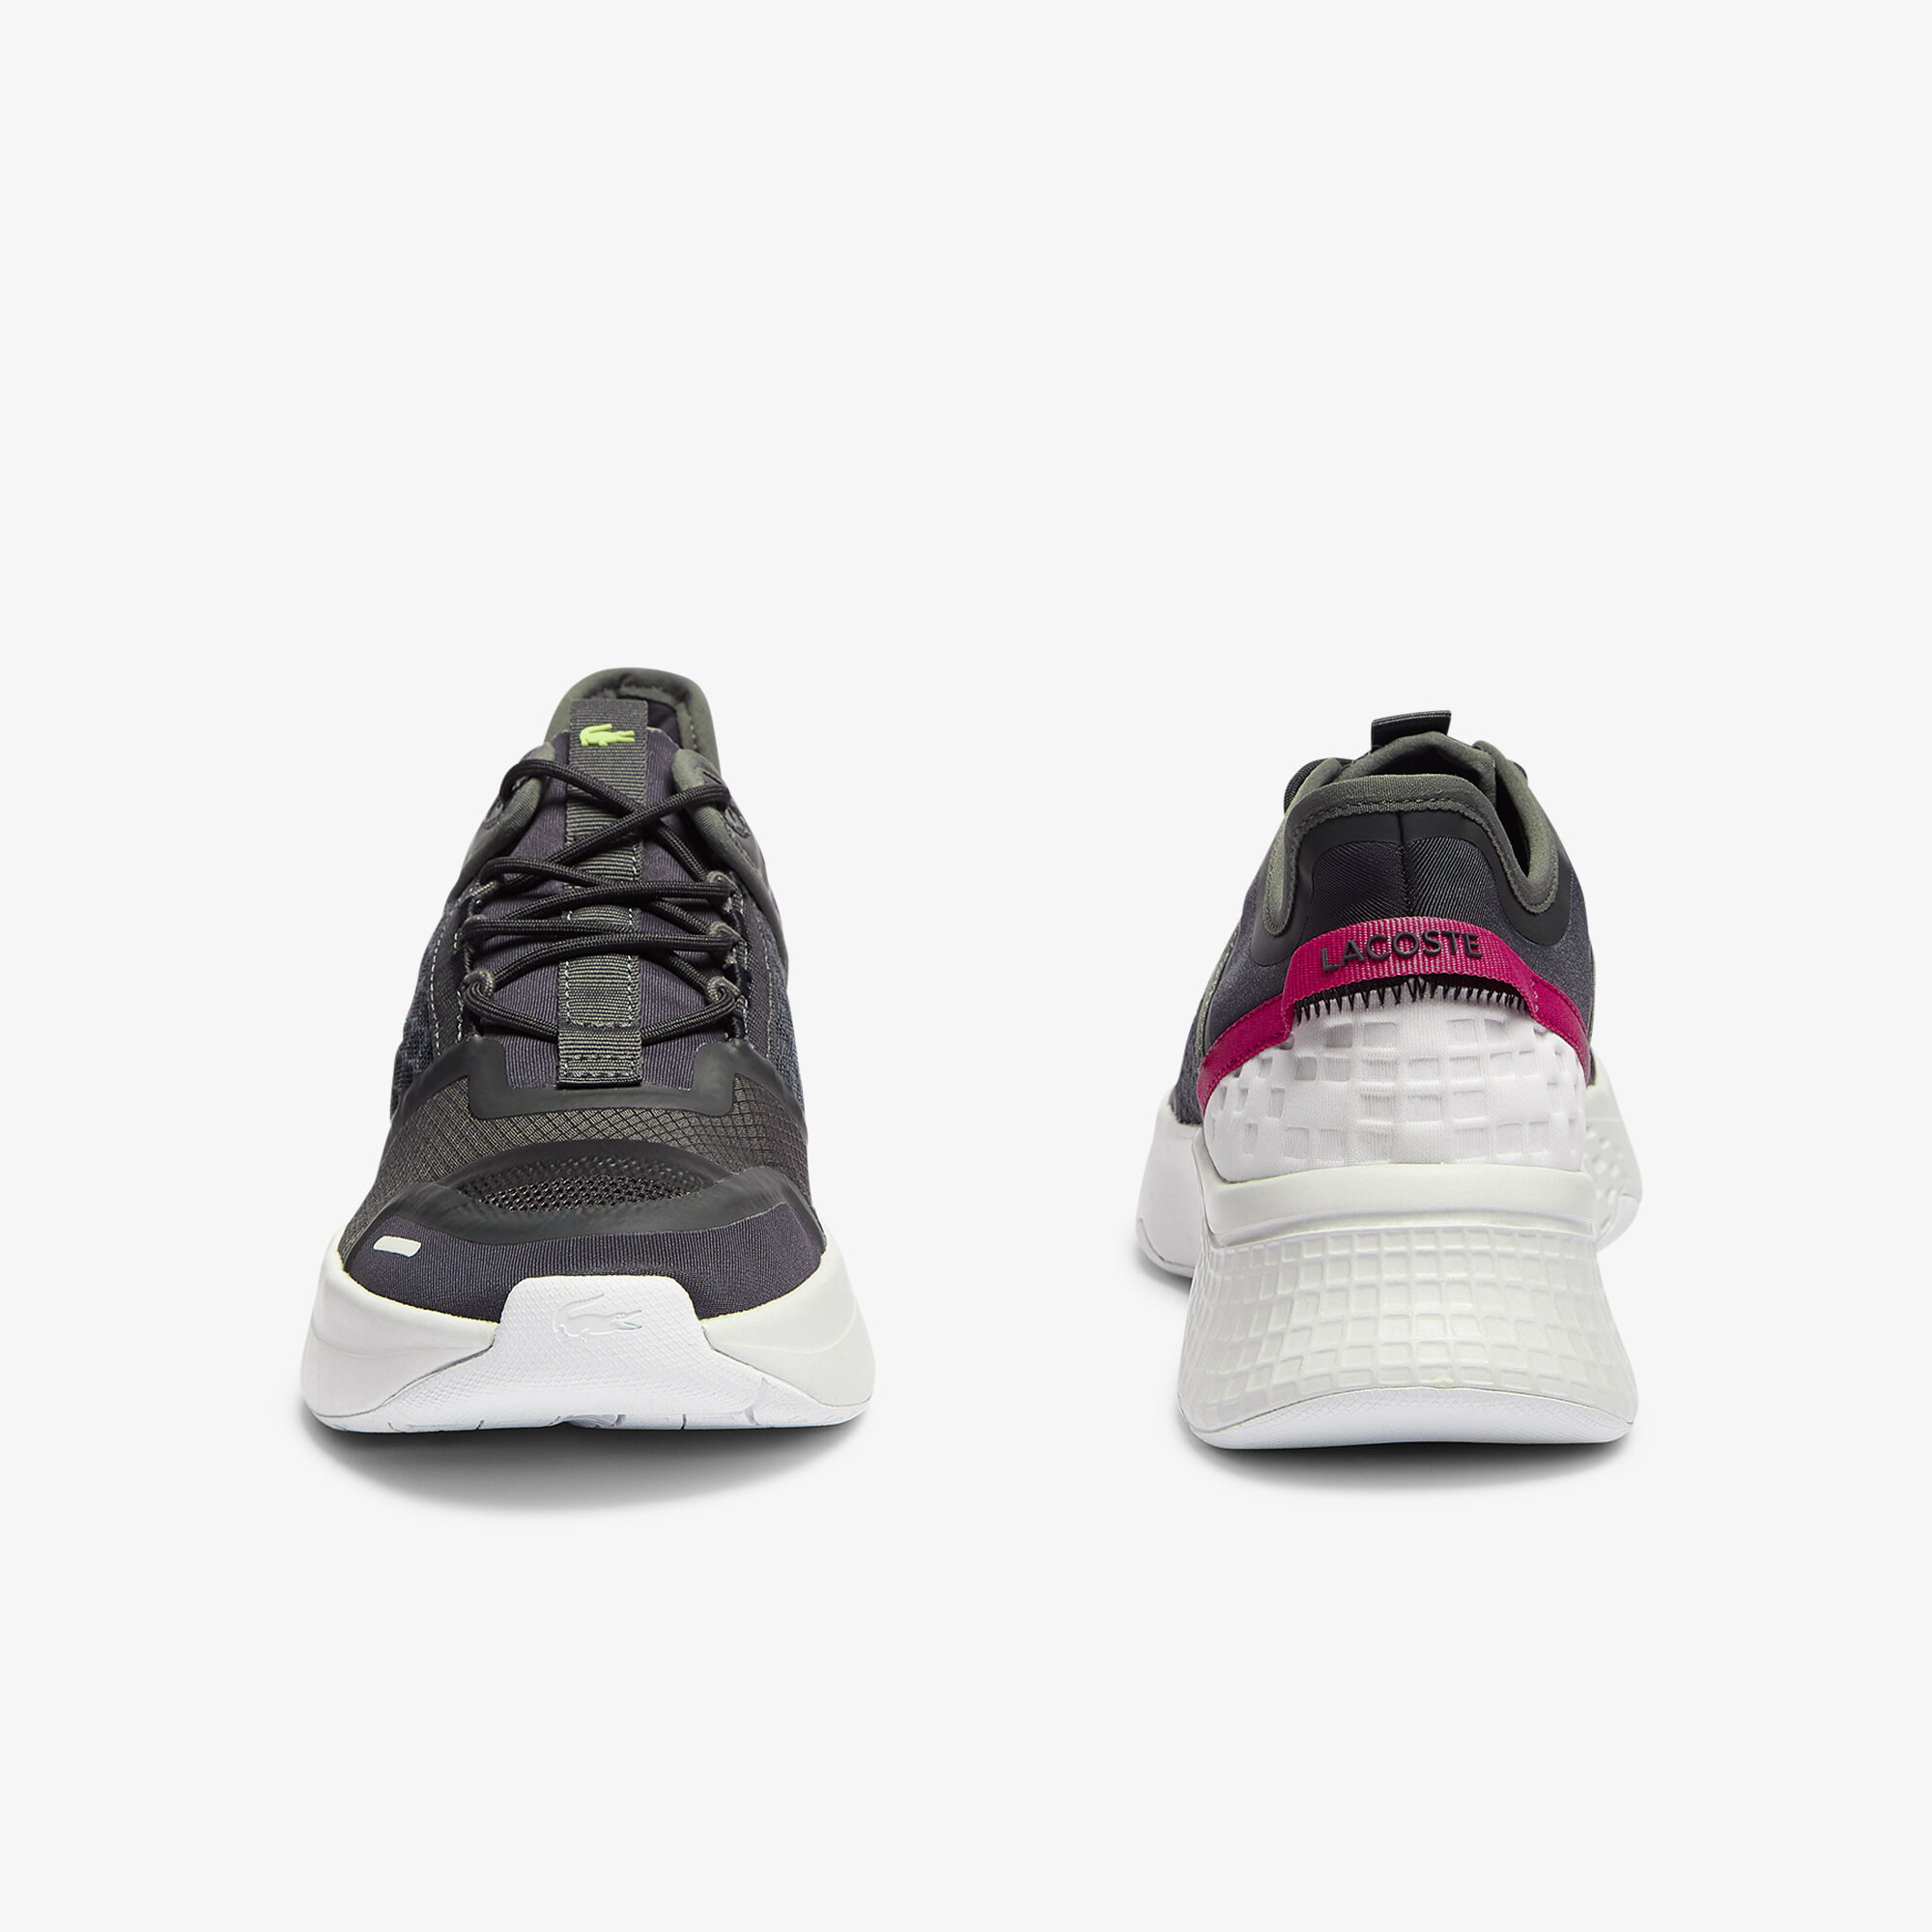 Women's Court-Drive Vantage Textile and TPU Trainers